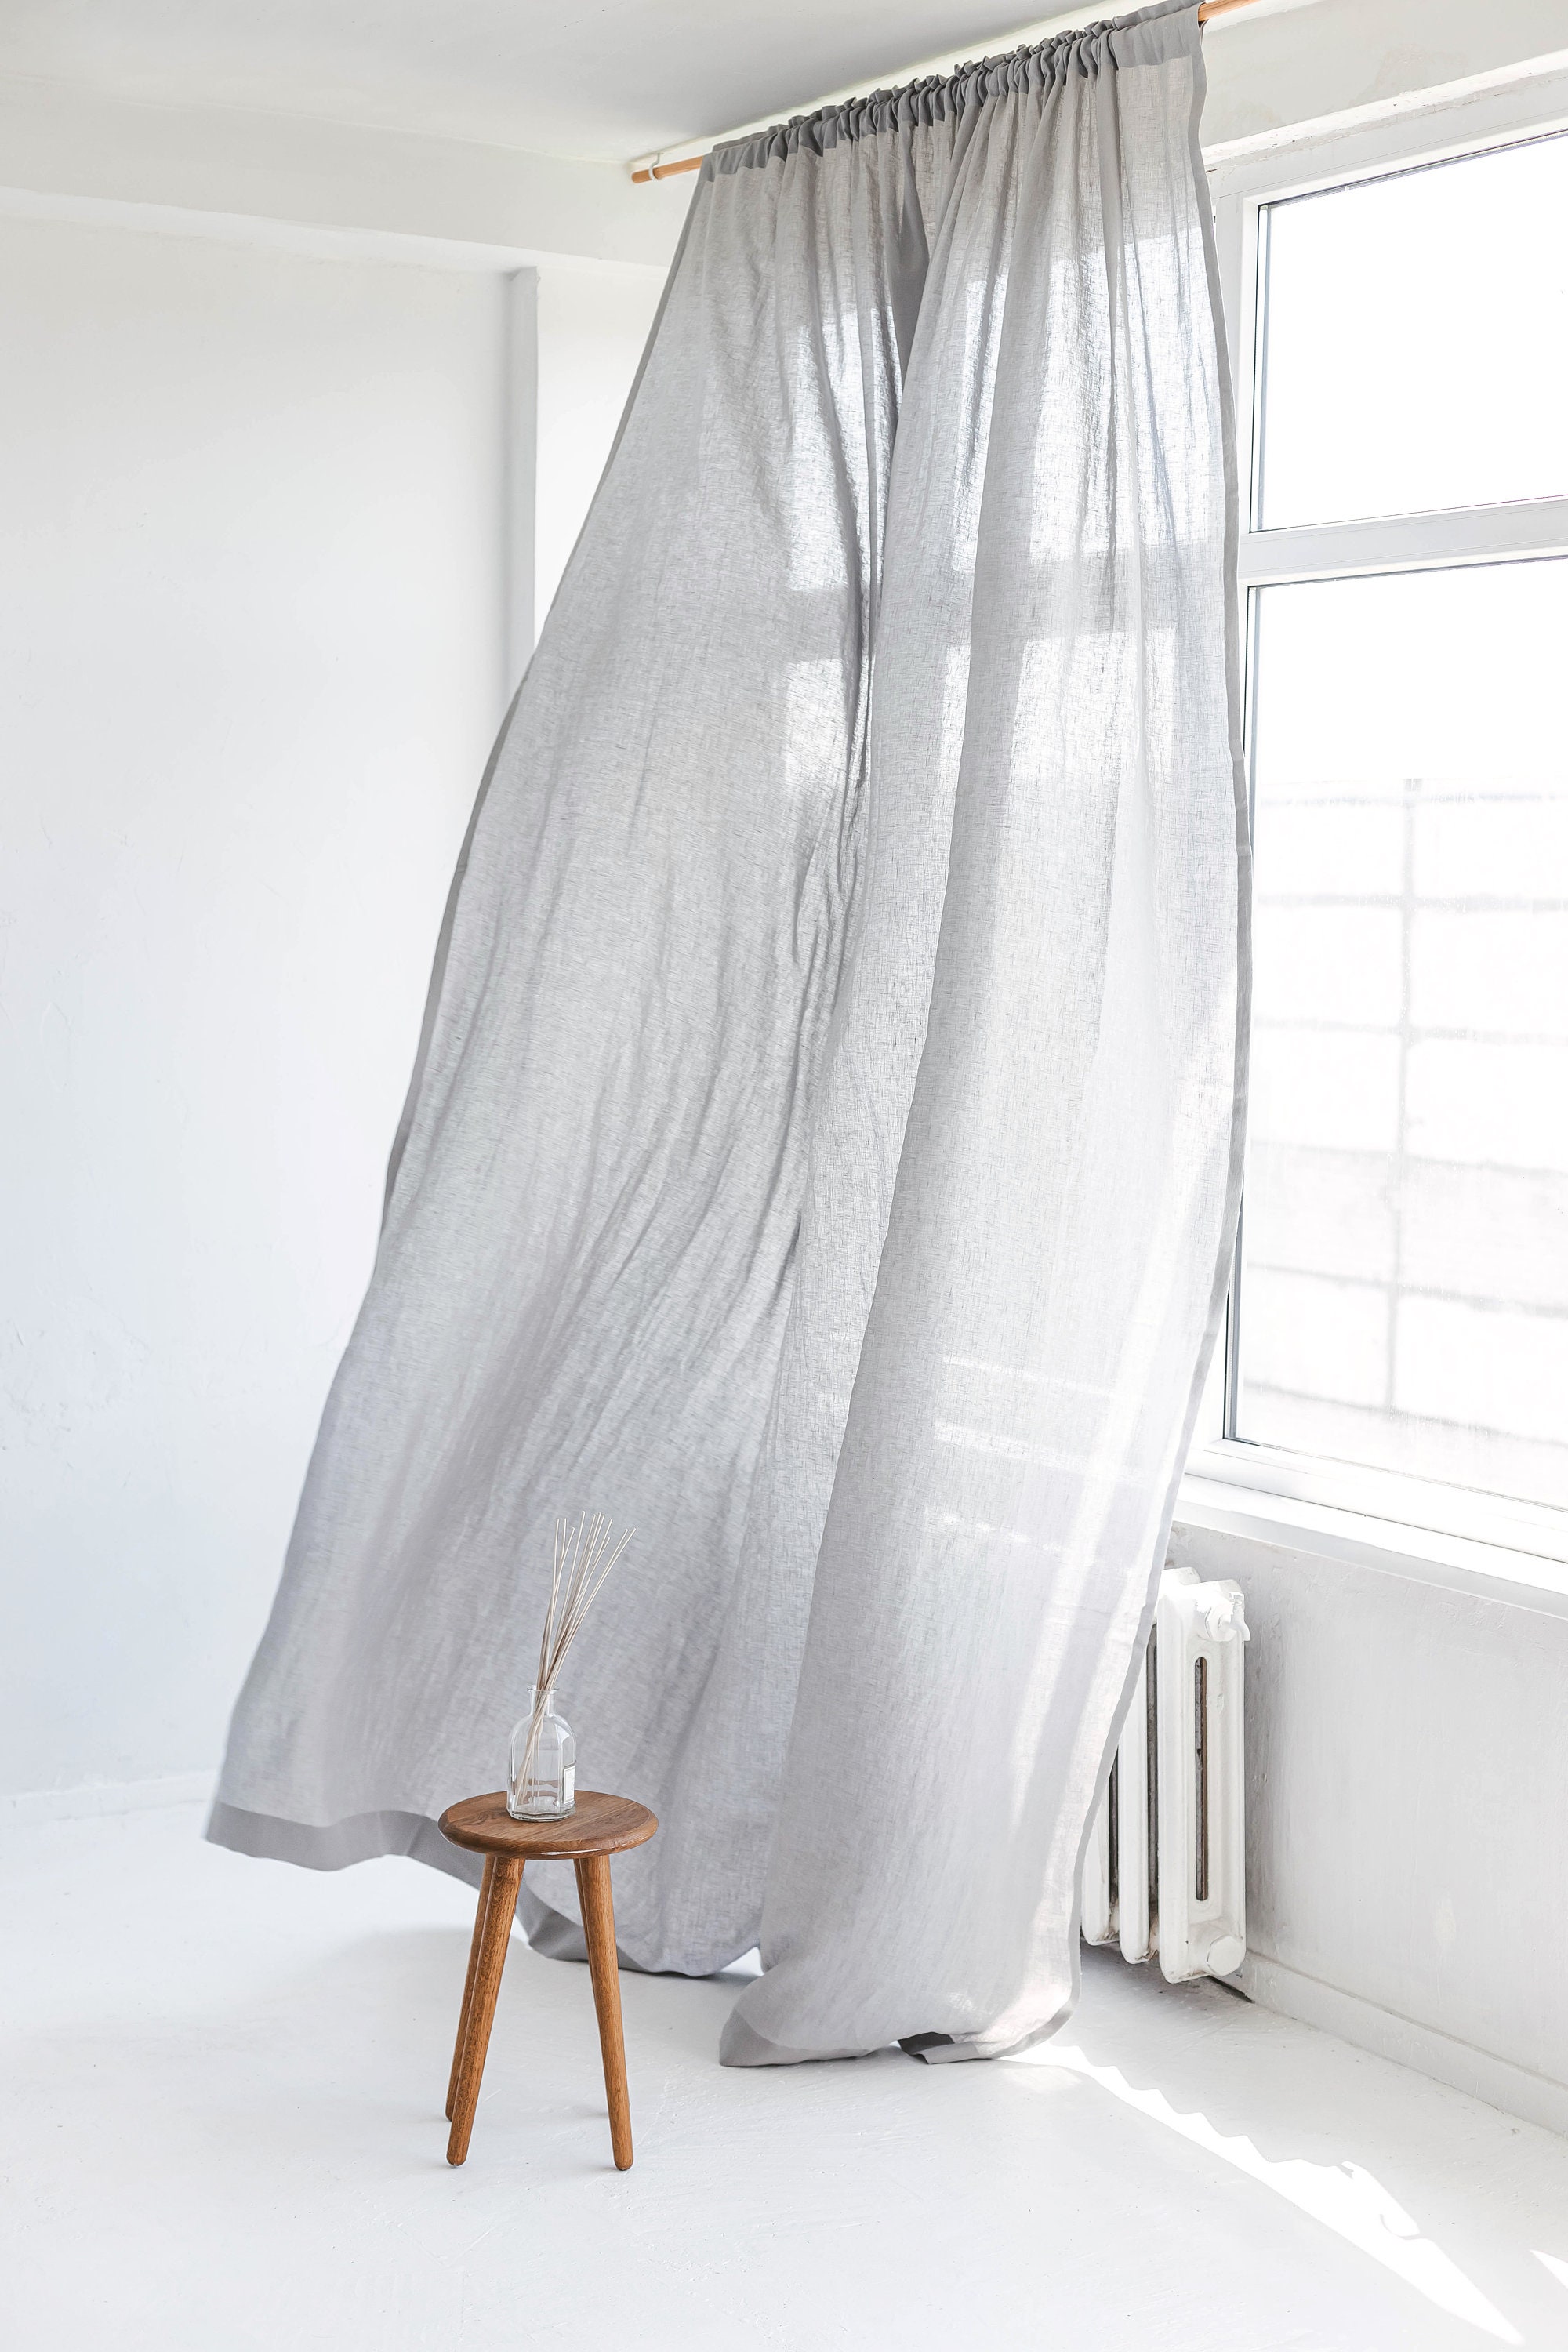 sale online with free shipping 86.6/220 cm Width Linen Curtains